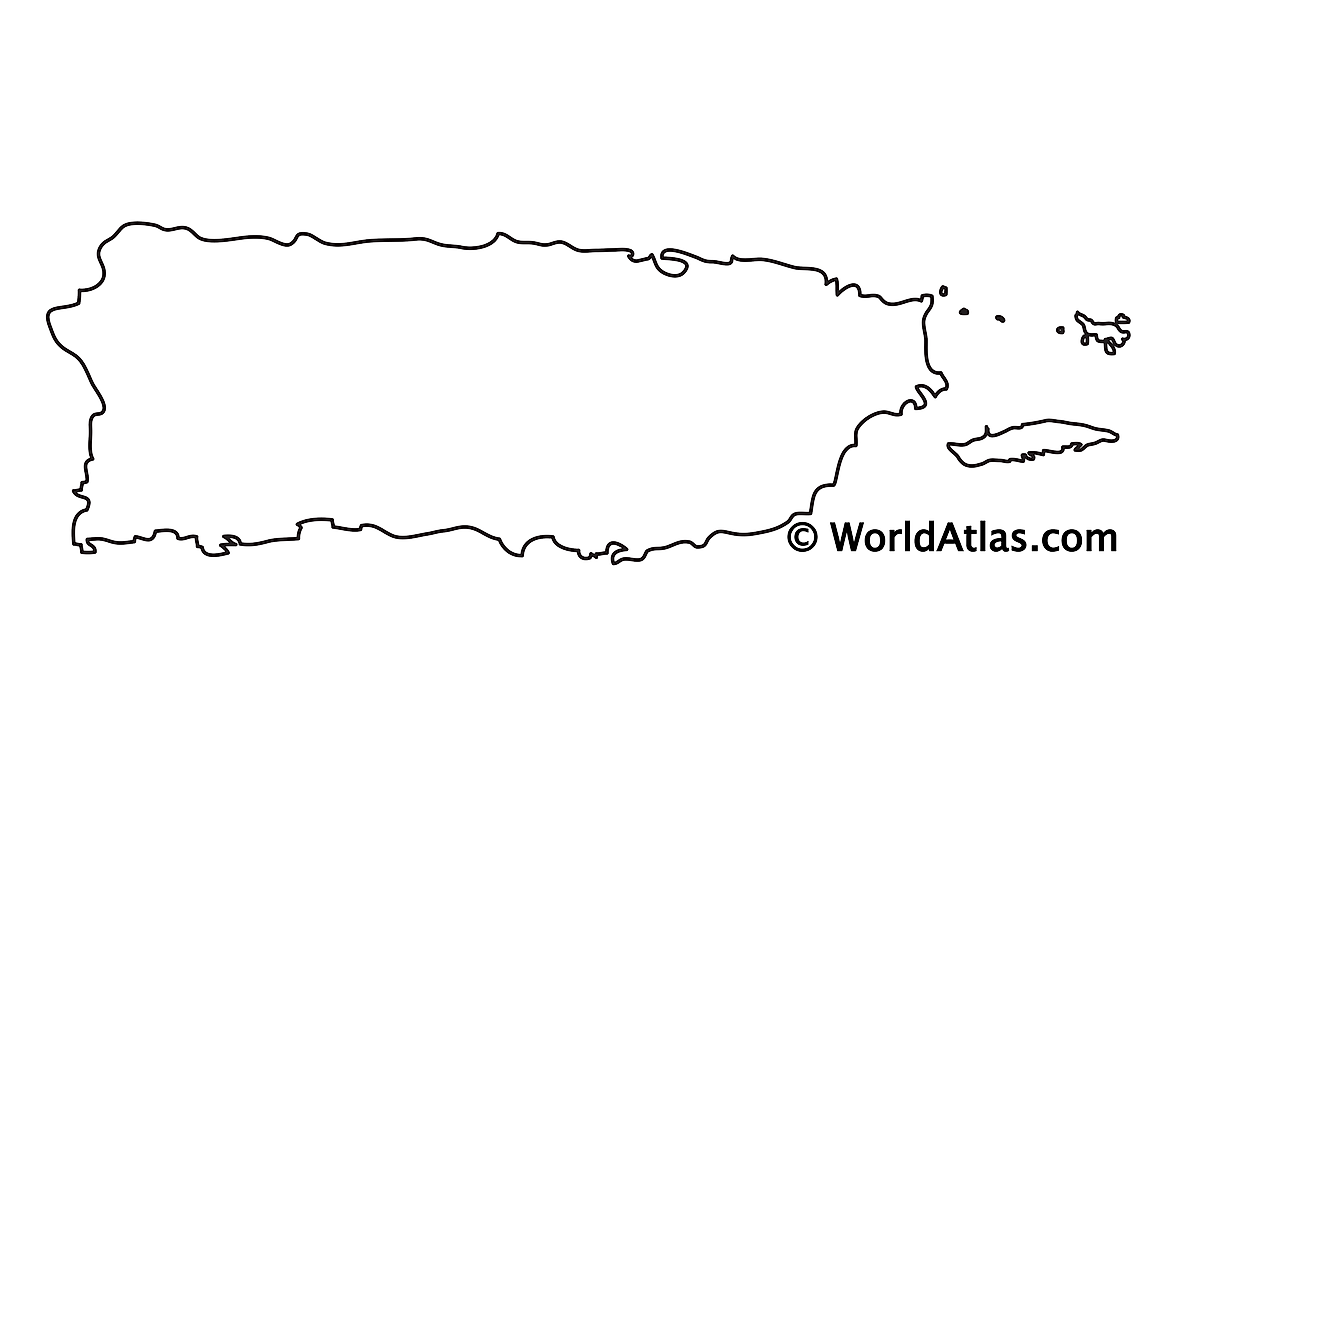 Blank outline map of Puerto Rico